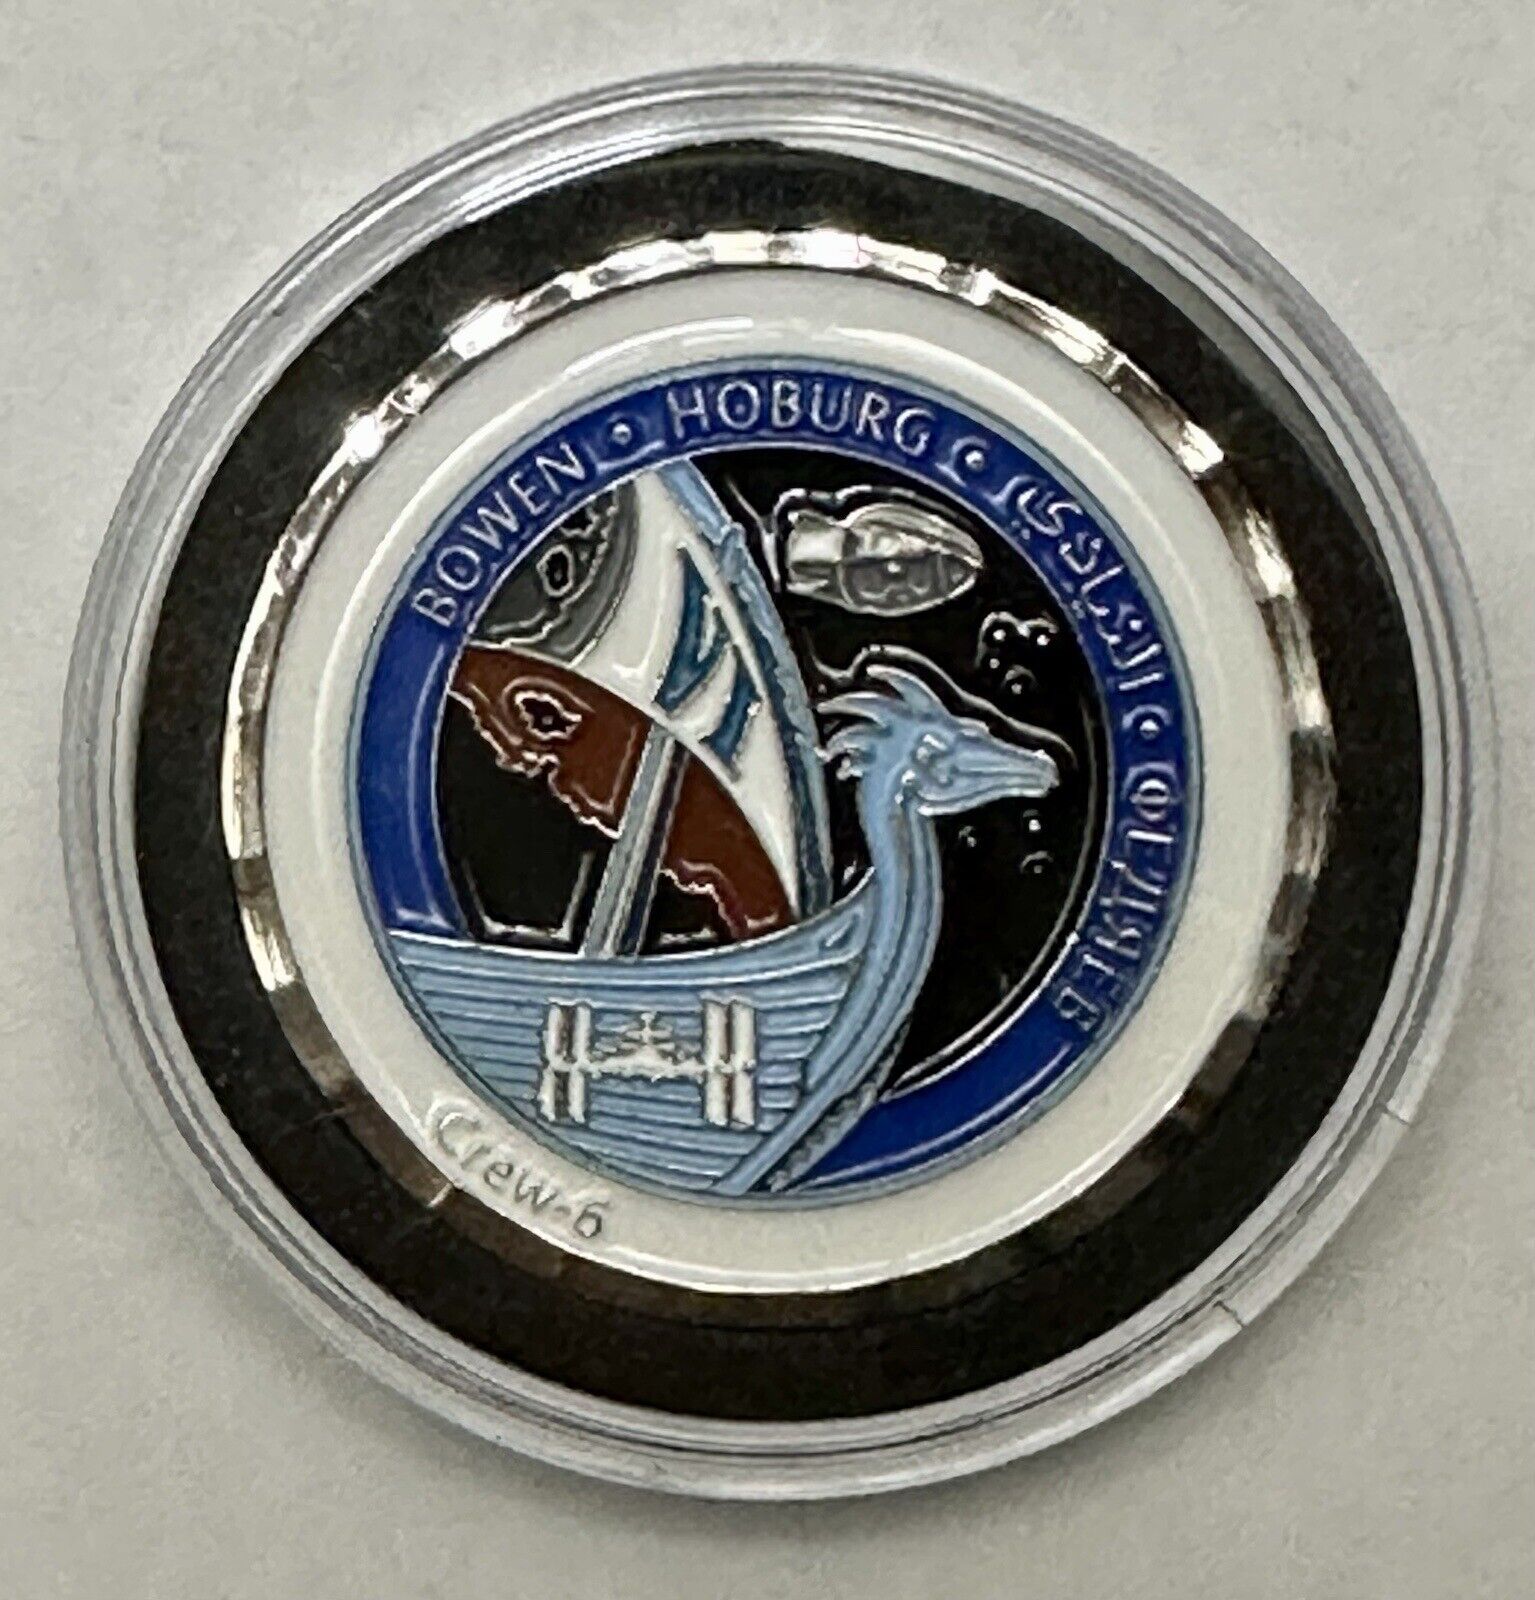 SpaceX Crew-6 Mission *Limited Edition* Coin, Serialized/Stamped: 26/50.